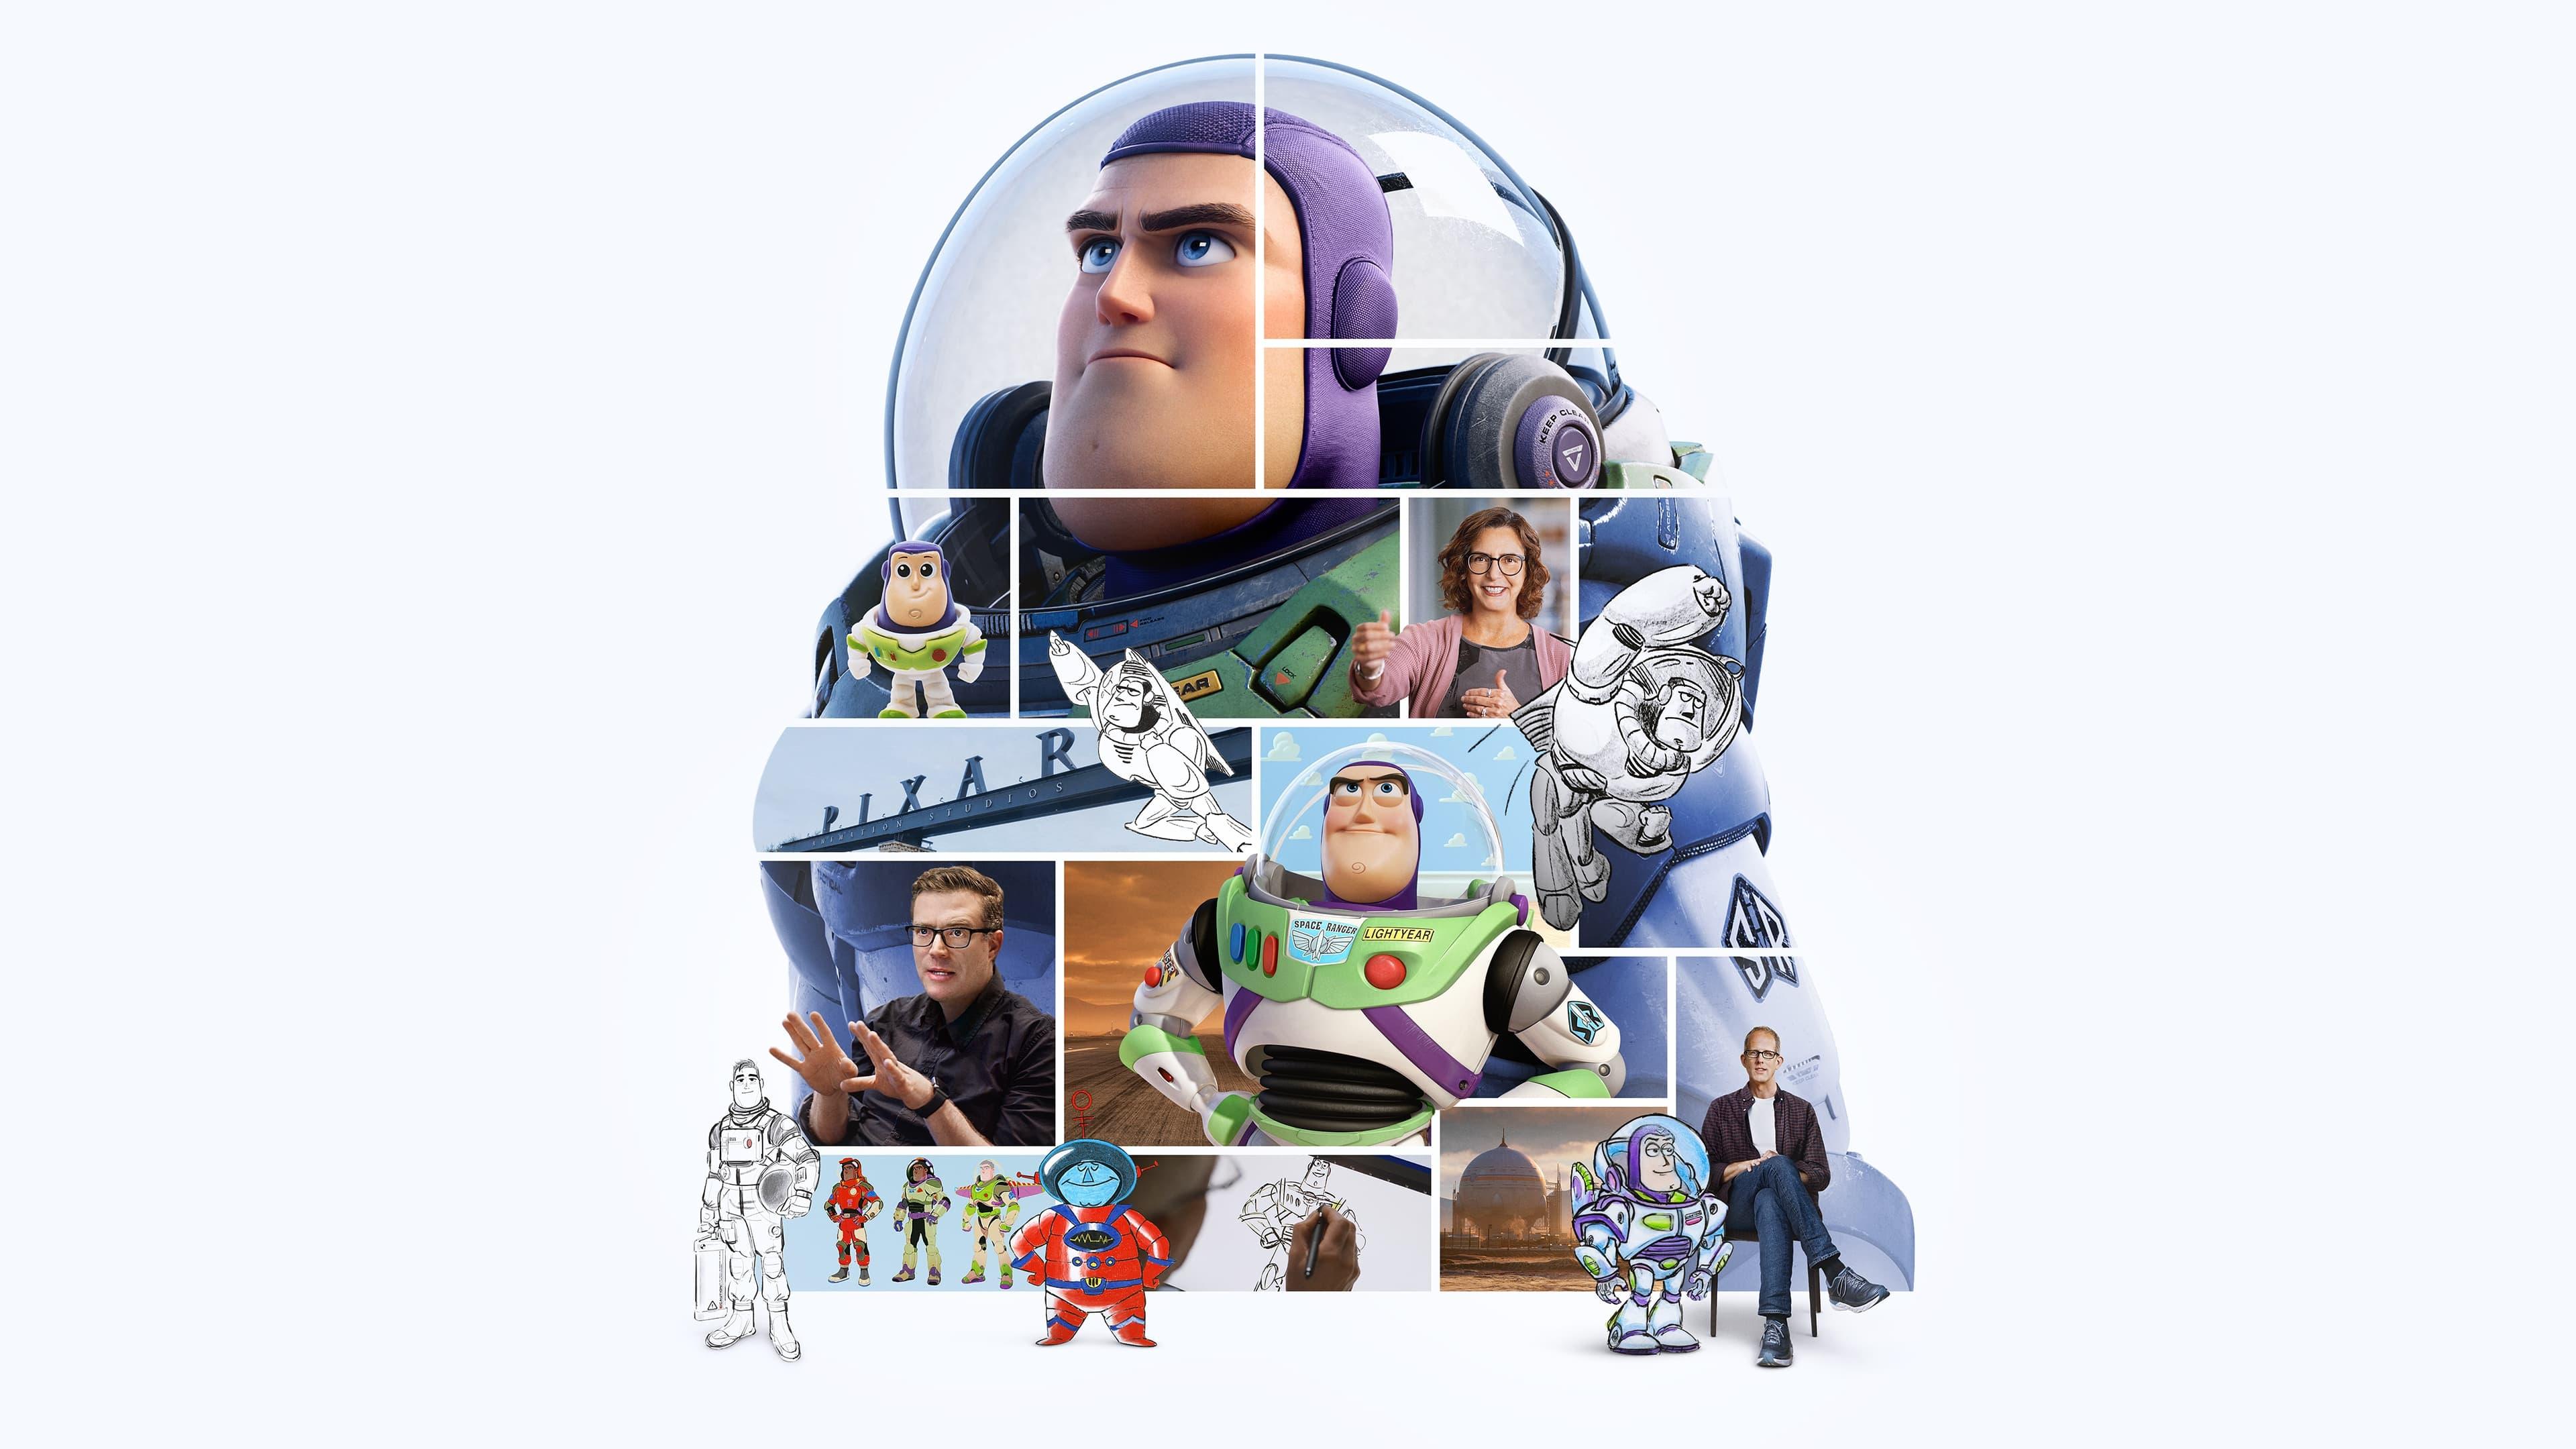 Beyond Infinity: Buzz and the Journey to Lightyear backdrop